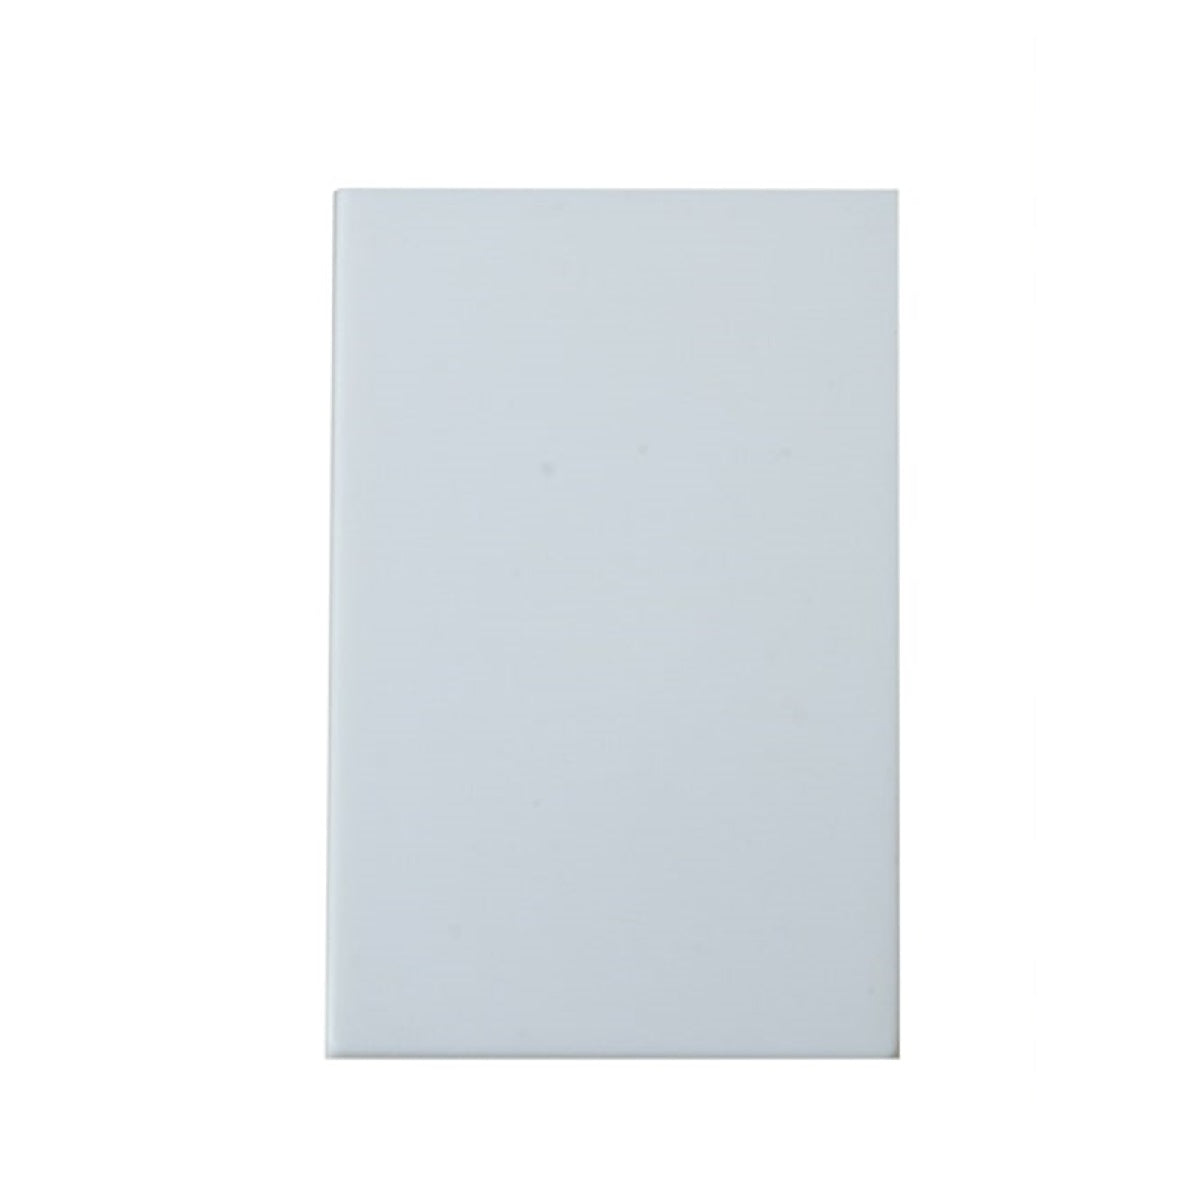 EssCable EFP-1/2BLANK-T Euro White Half Faceplate Blank